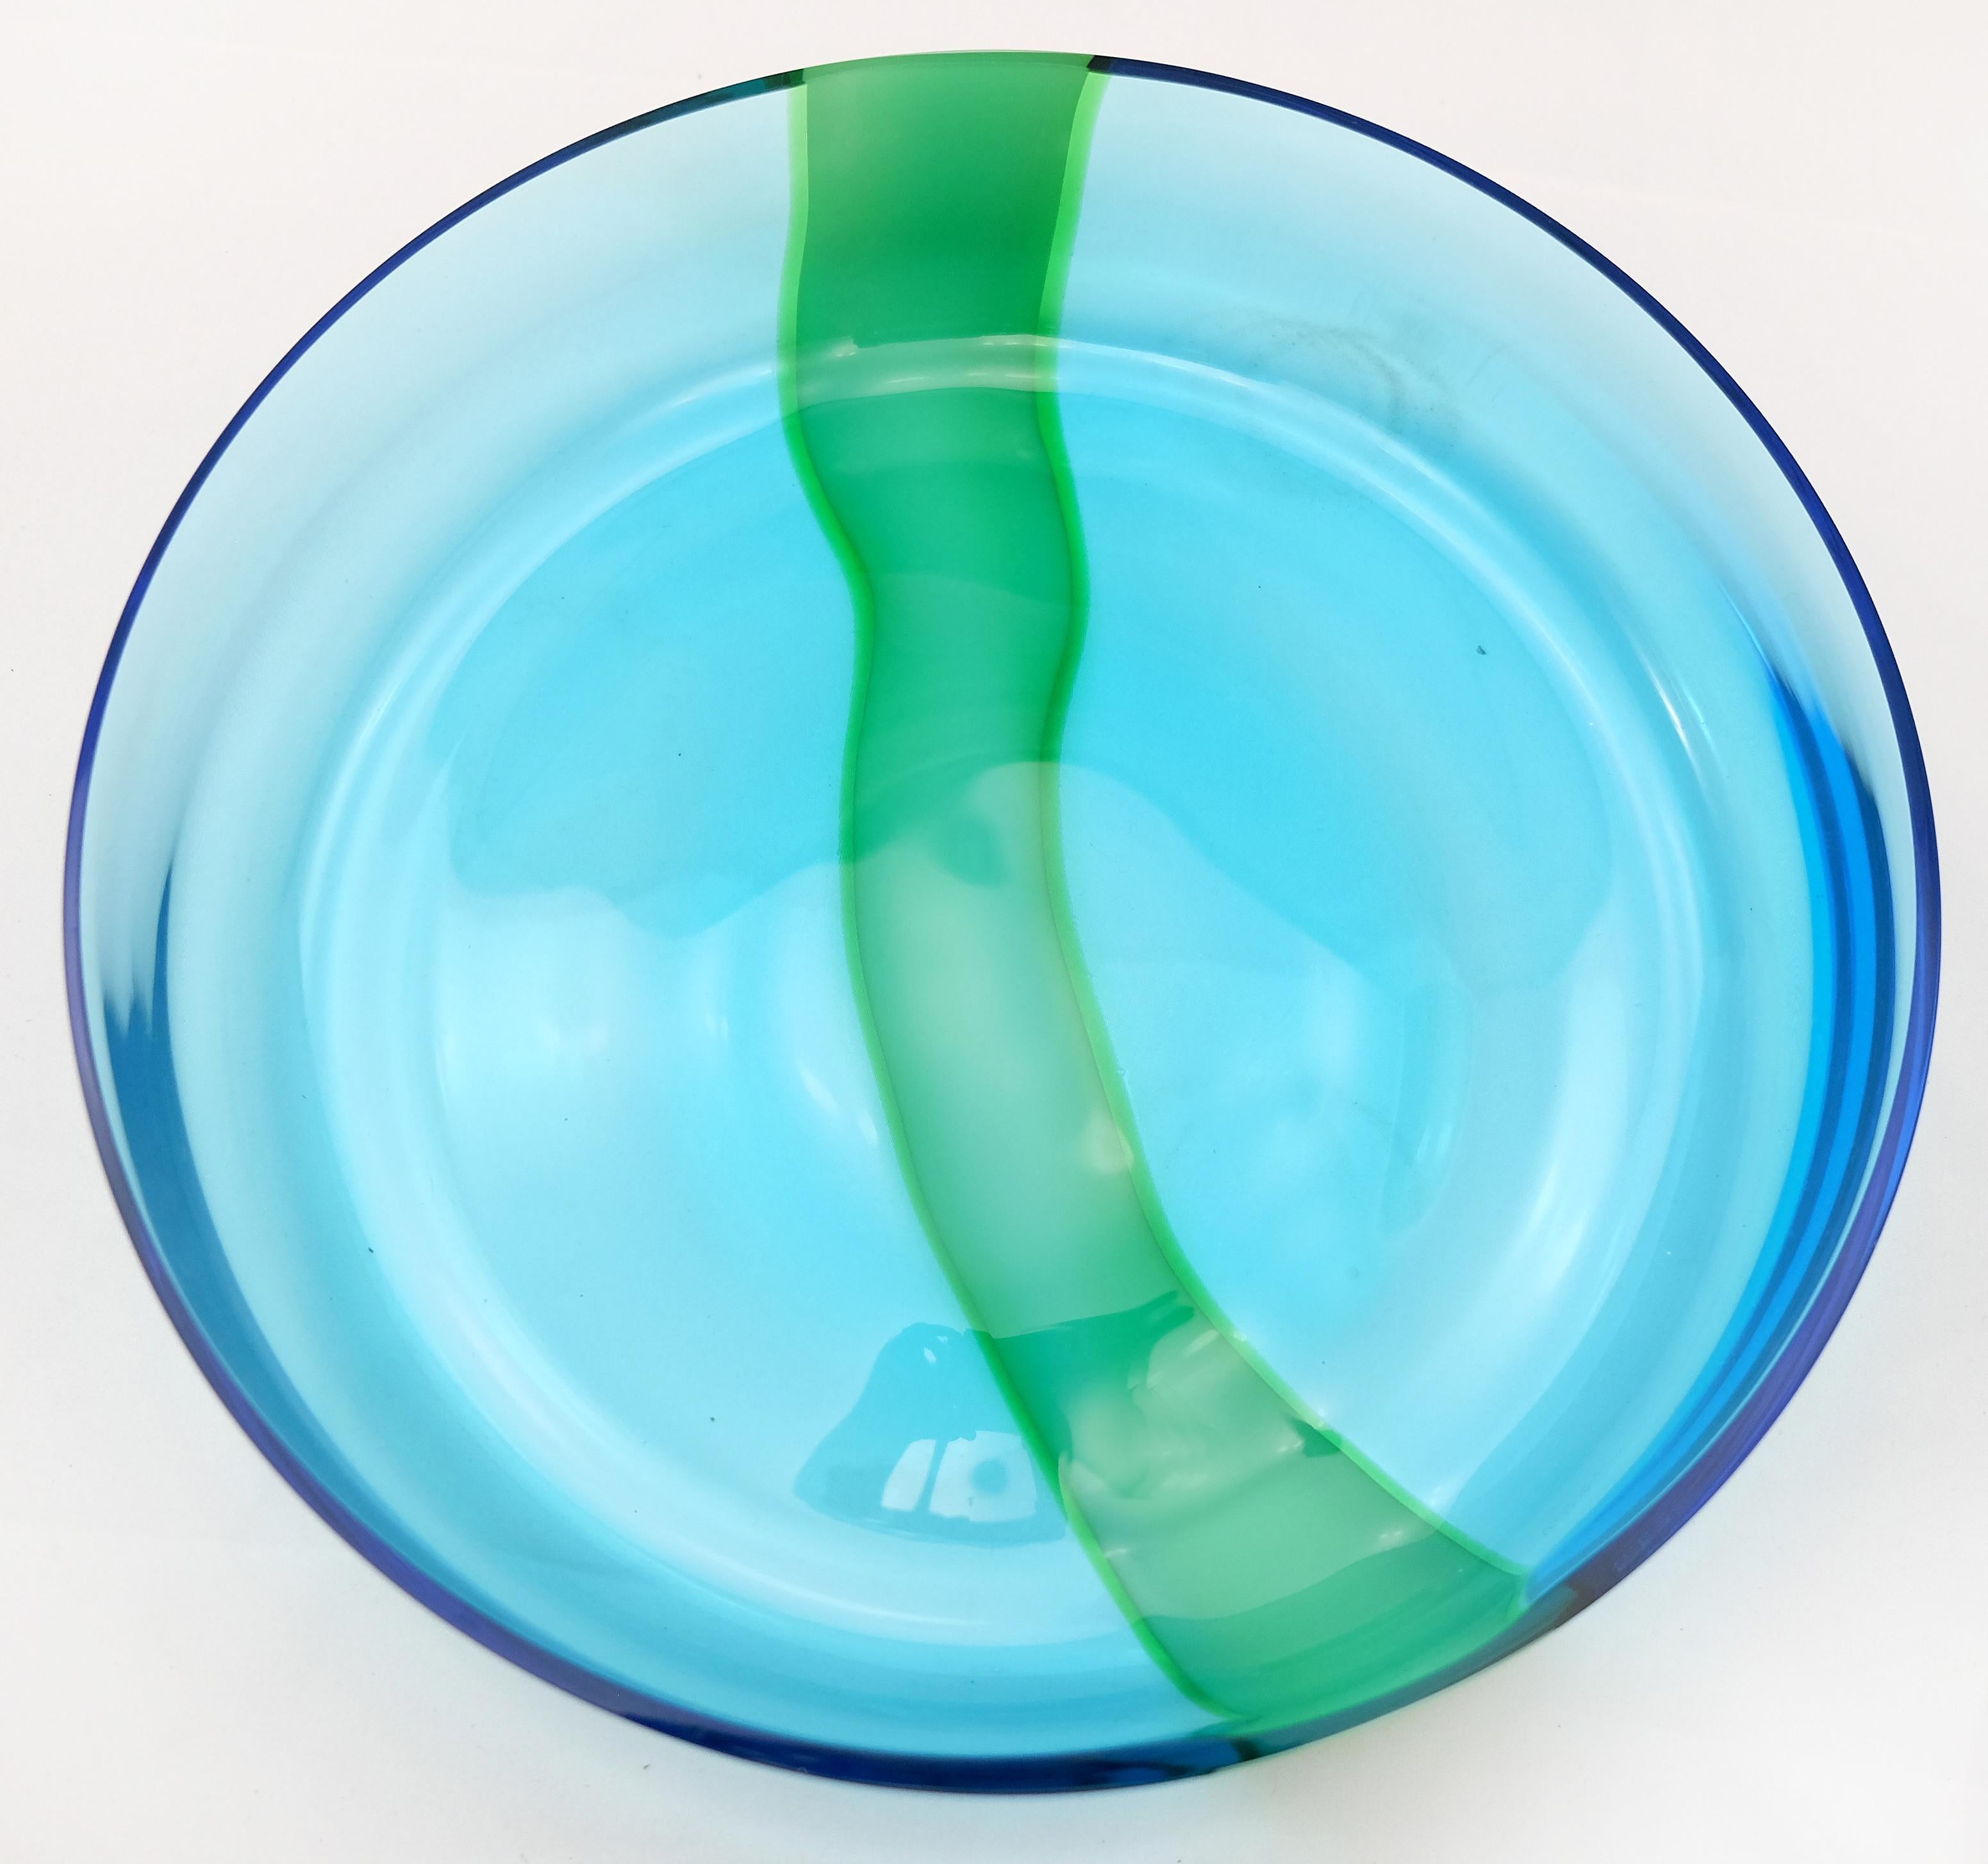 Offered for sale is a new unused blue and green Murano glass bowl by V. Nasson & Co. Vincenzo Nason established his glassworks, Vincenzo Nason & Cie (VNC) on the island of Murano, Venice, Italy in 1967, after having previously worked at Venini. The